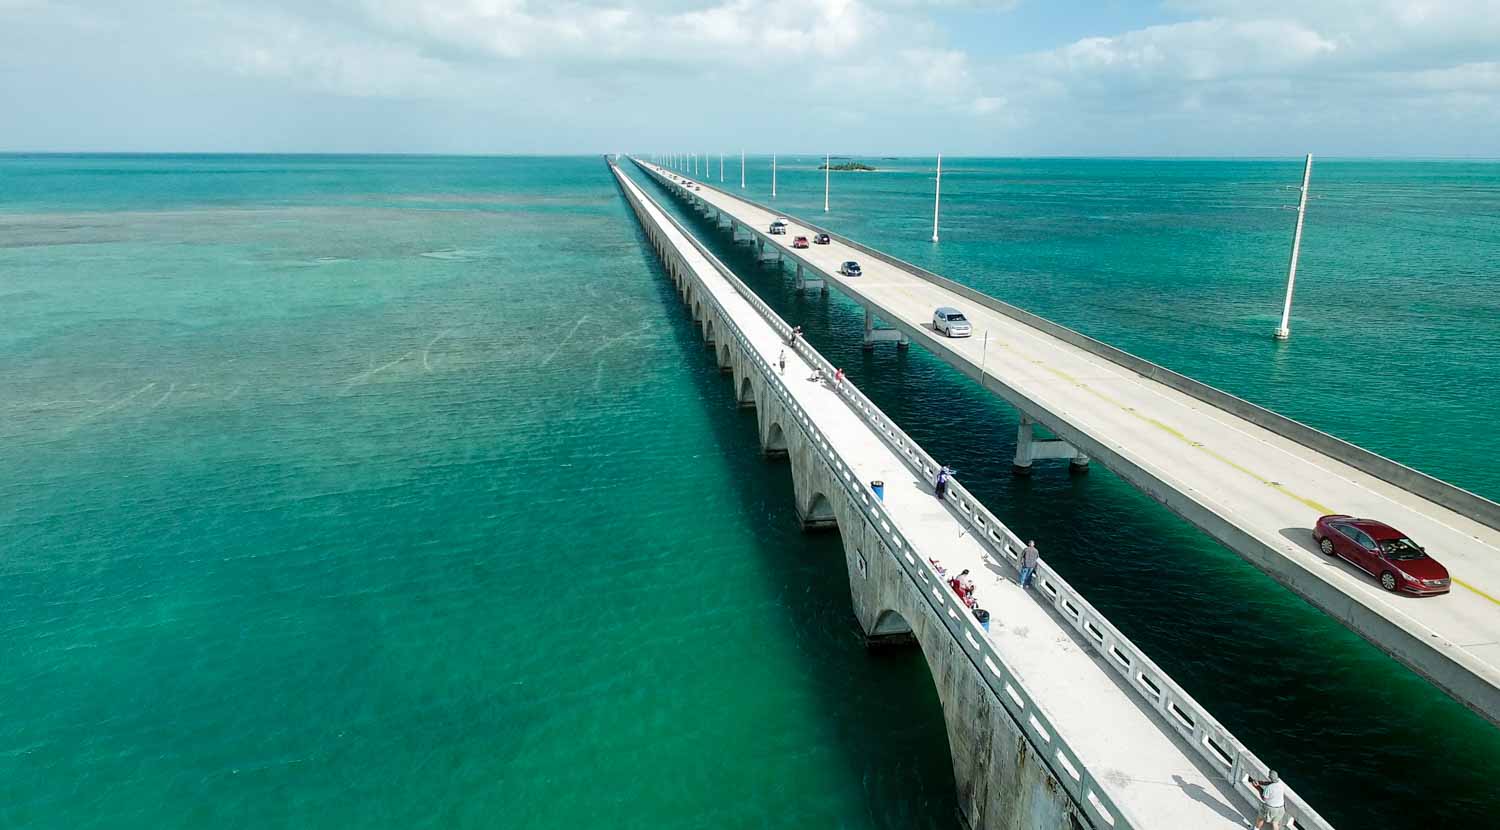 Aerial view of the bridge connecting the Florida Keys - the Overseas Highway is a memorable drive but best to plan your trip to avoid traffic if you're visiting Key West with kids